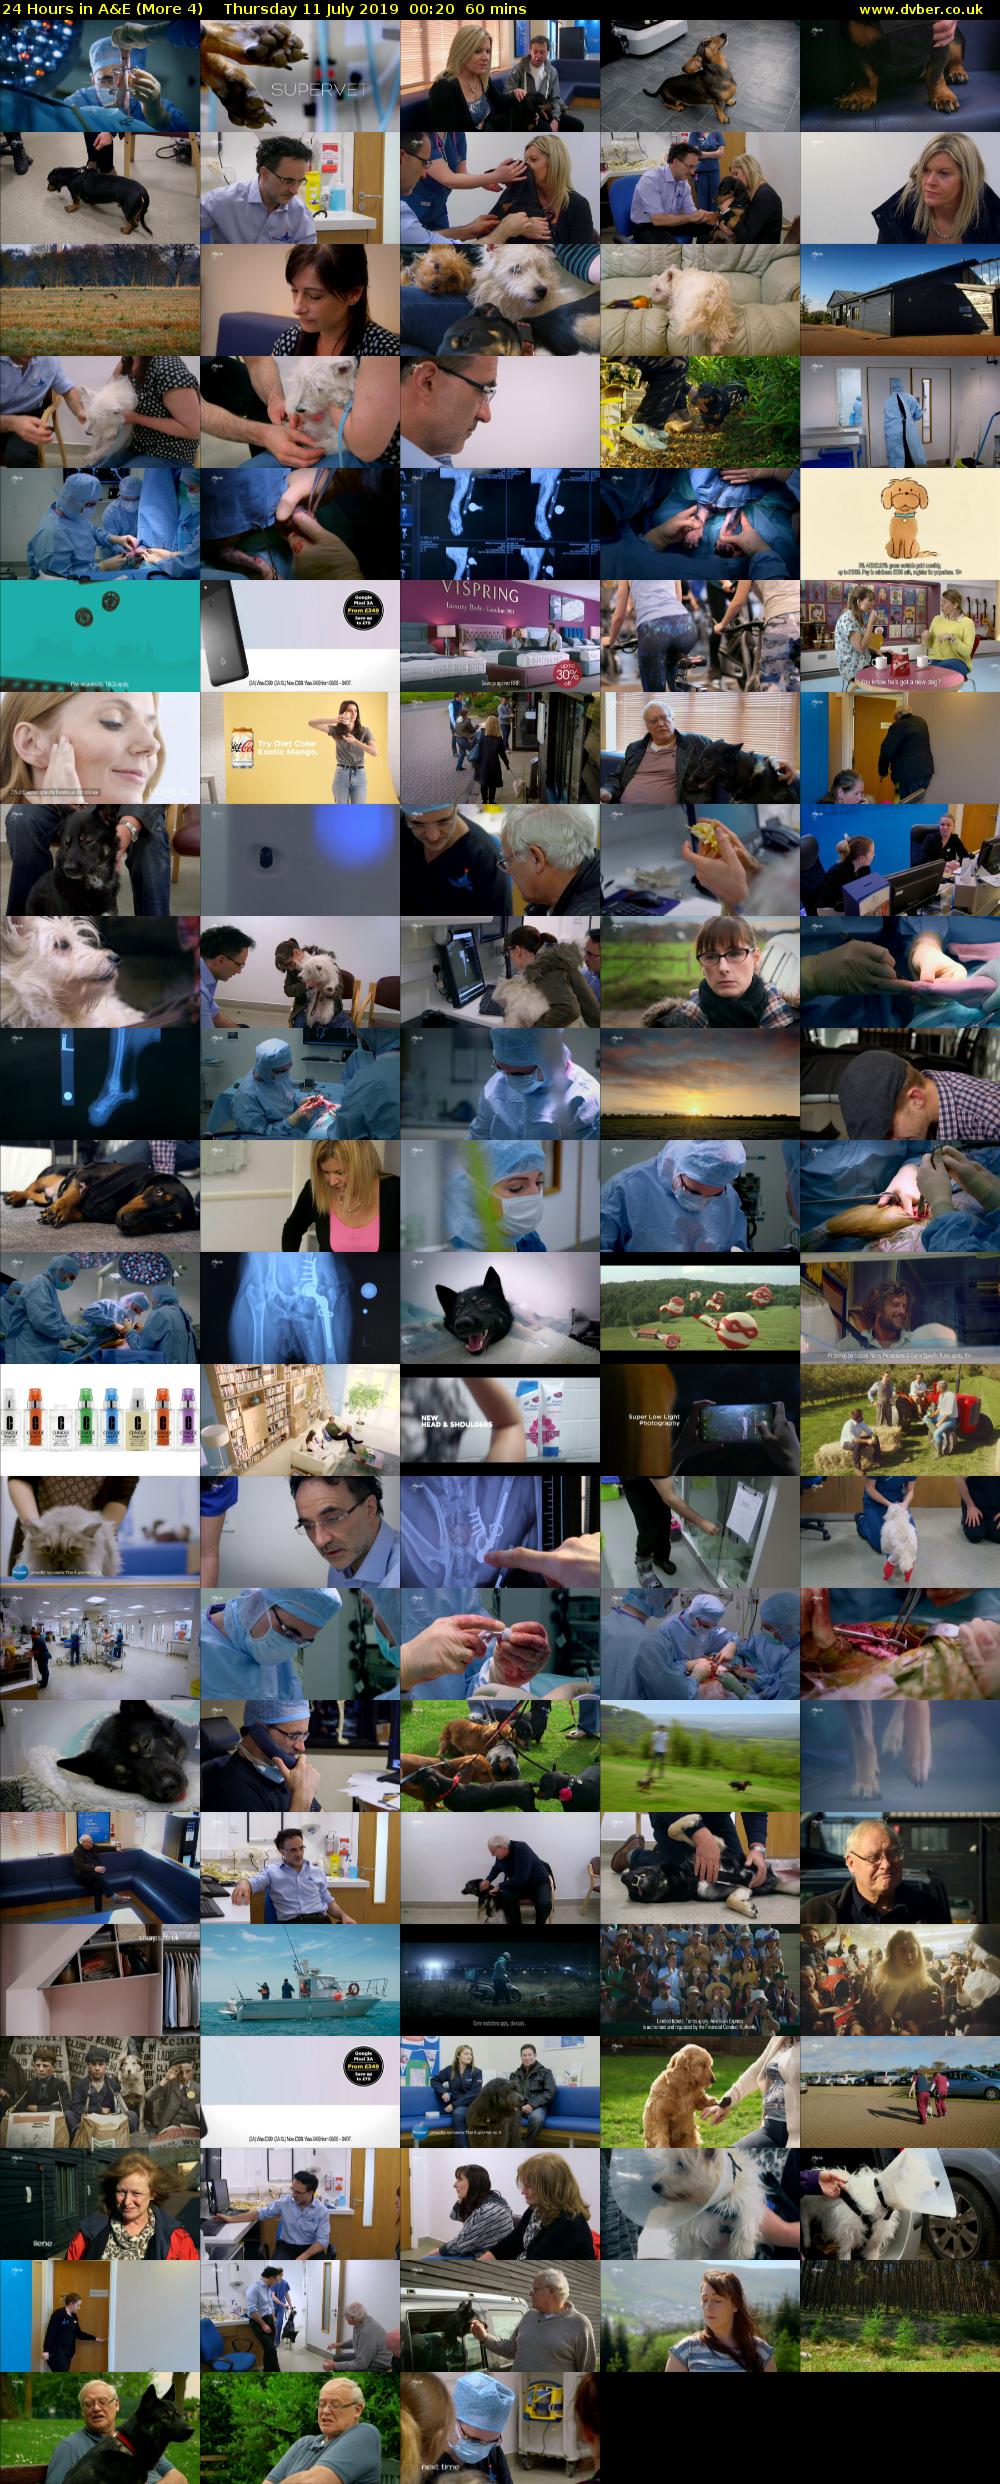 24 Hours in A&E (More 4) Thursday 11 July 2019 00:20 - 01:20